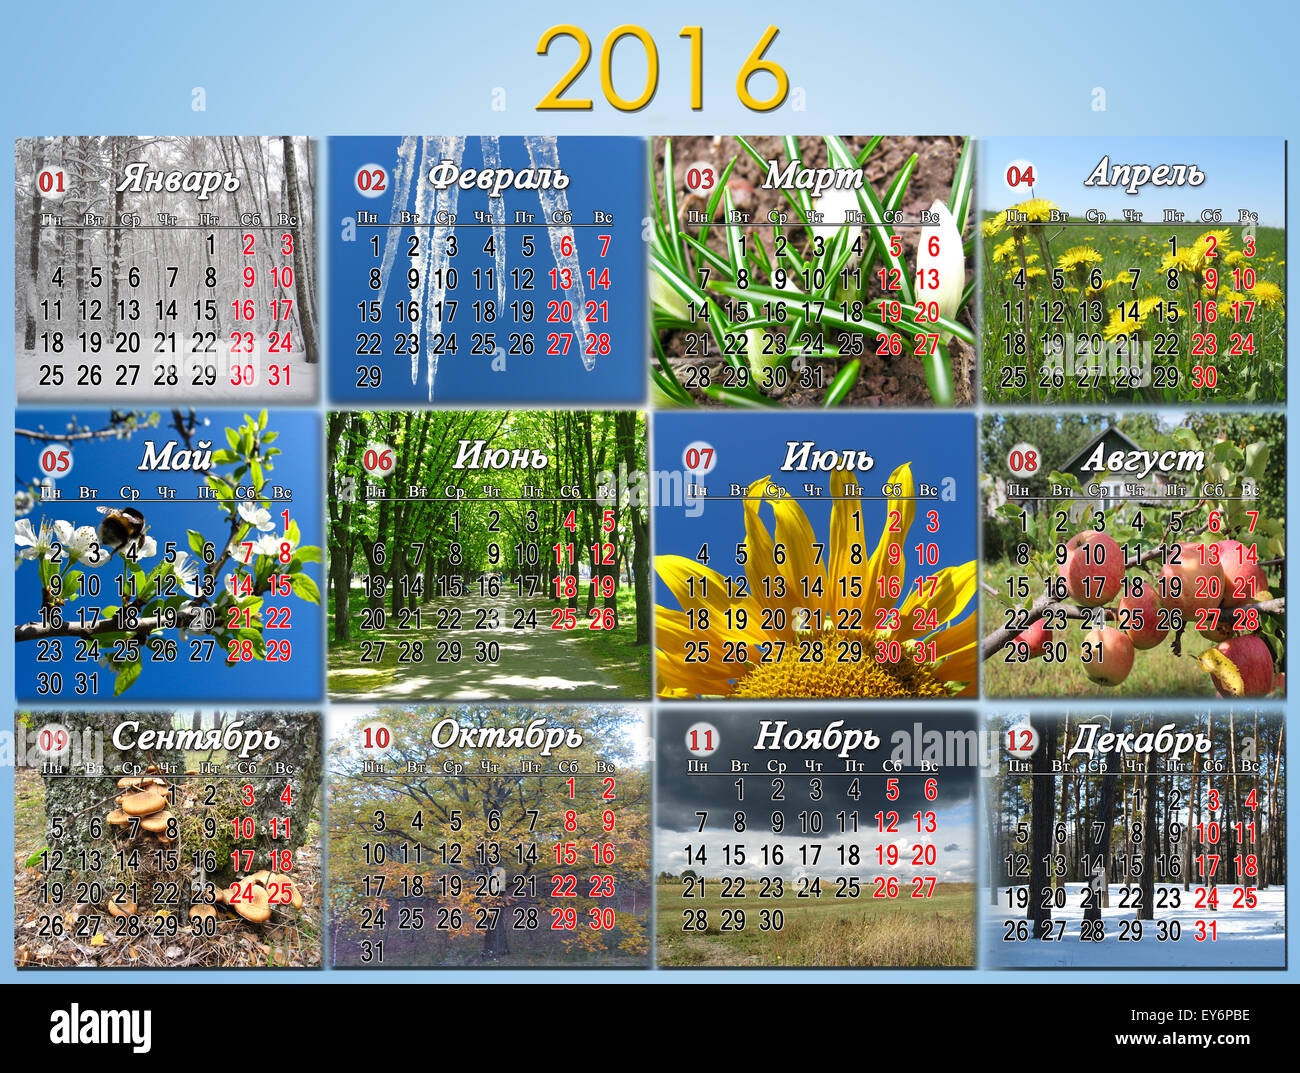 calendar for 2016 in Russian with photo of nature for every month Stock Photo